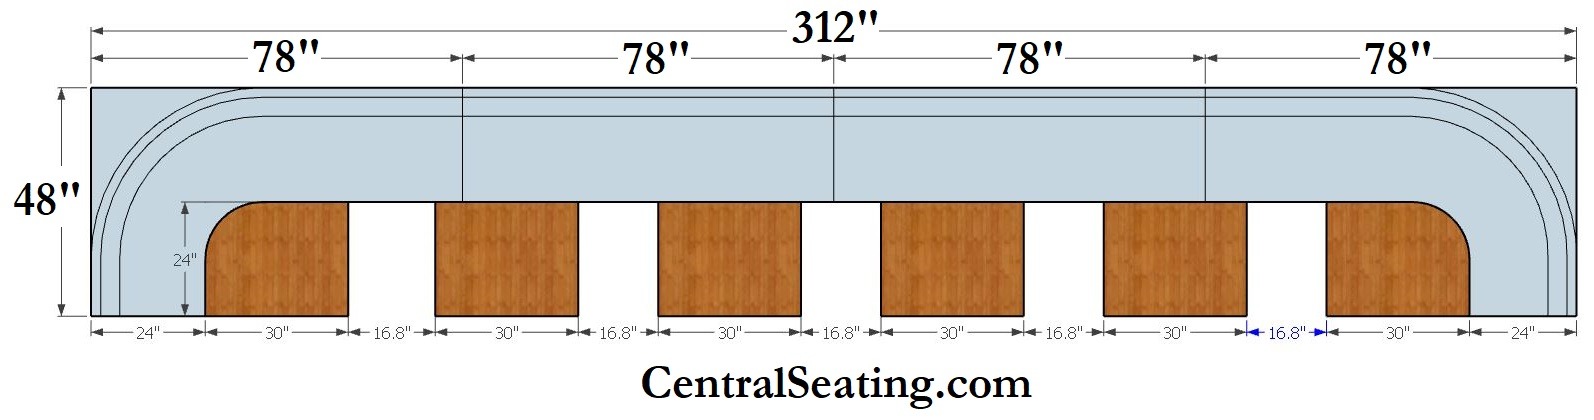 how many tables can 26' foot u shaped booth fit